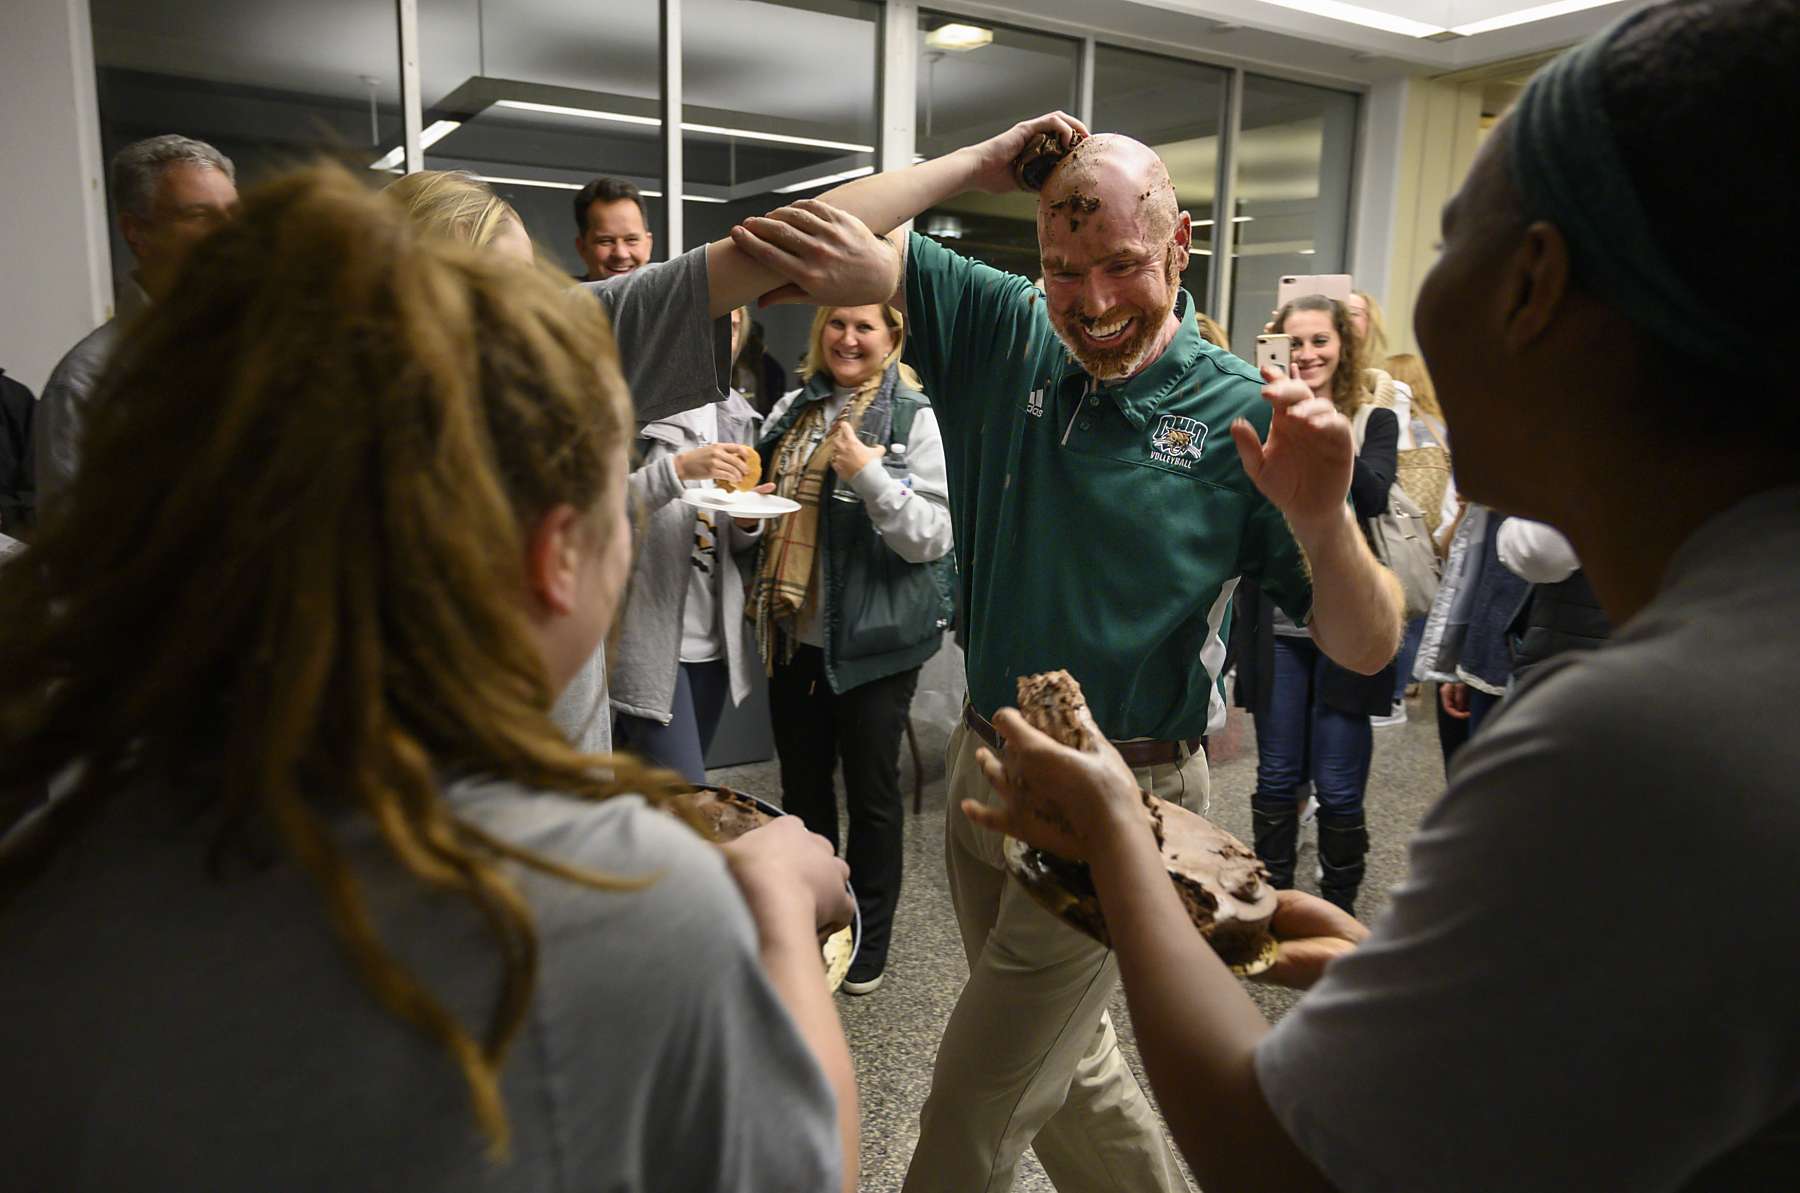 Ohio University volleyball coach, Deane Webb, smiles as his team surrounds him in celebration of senior game night